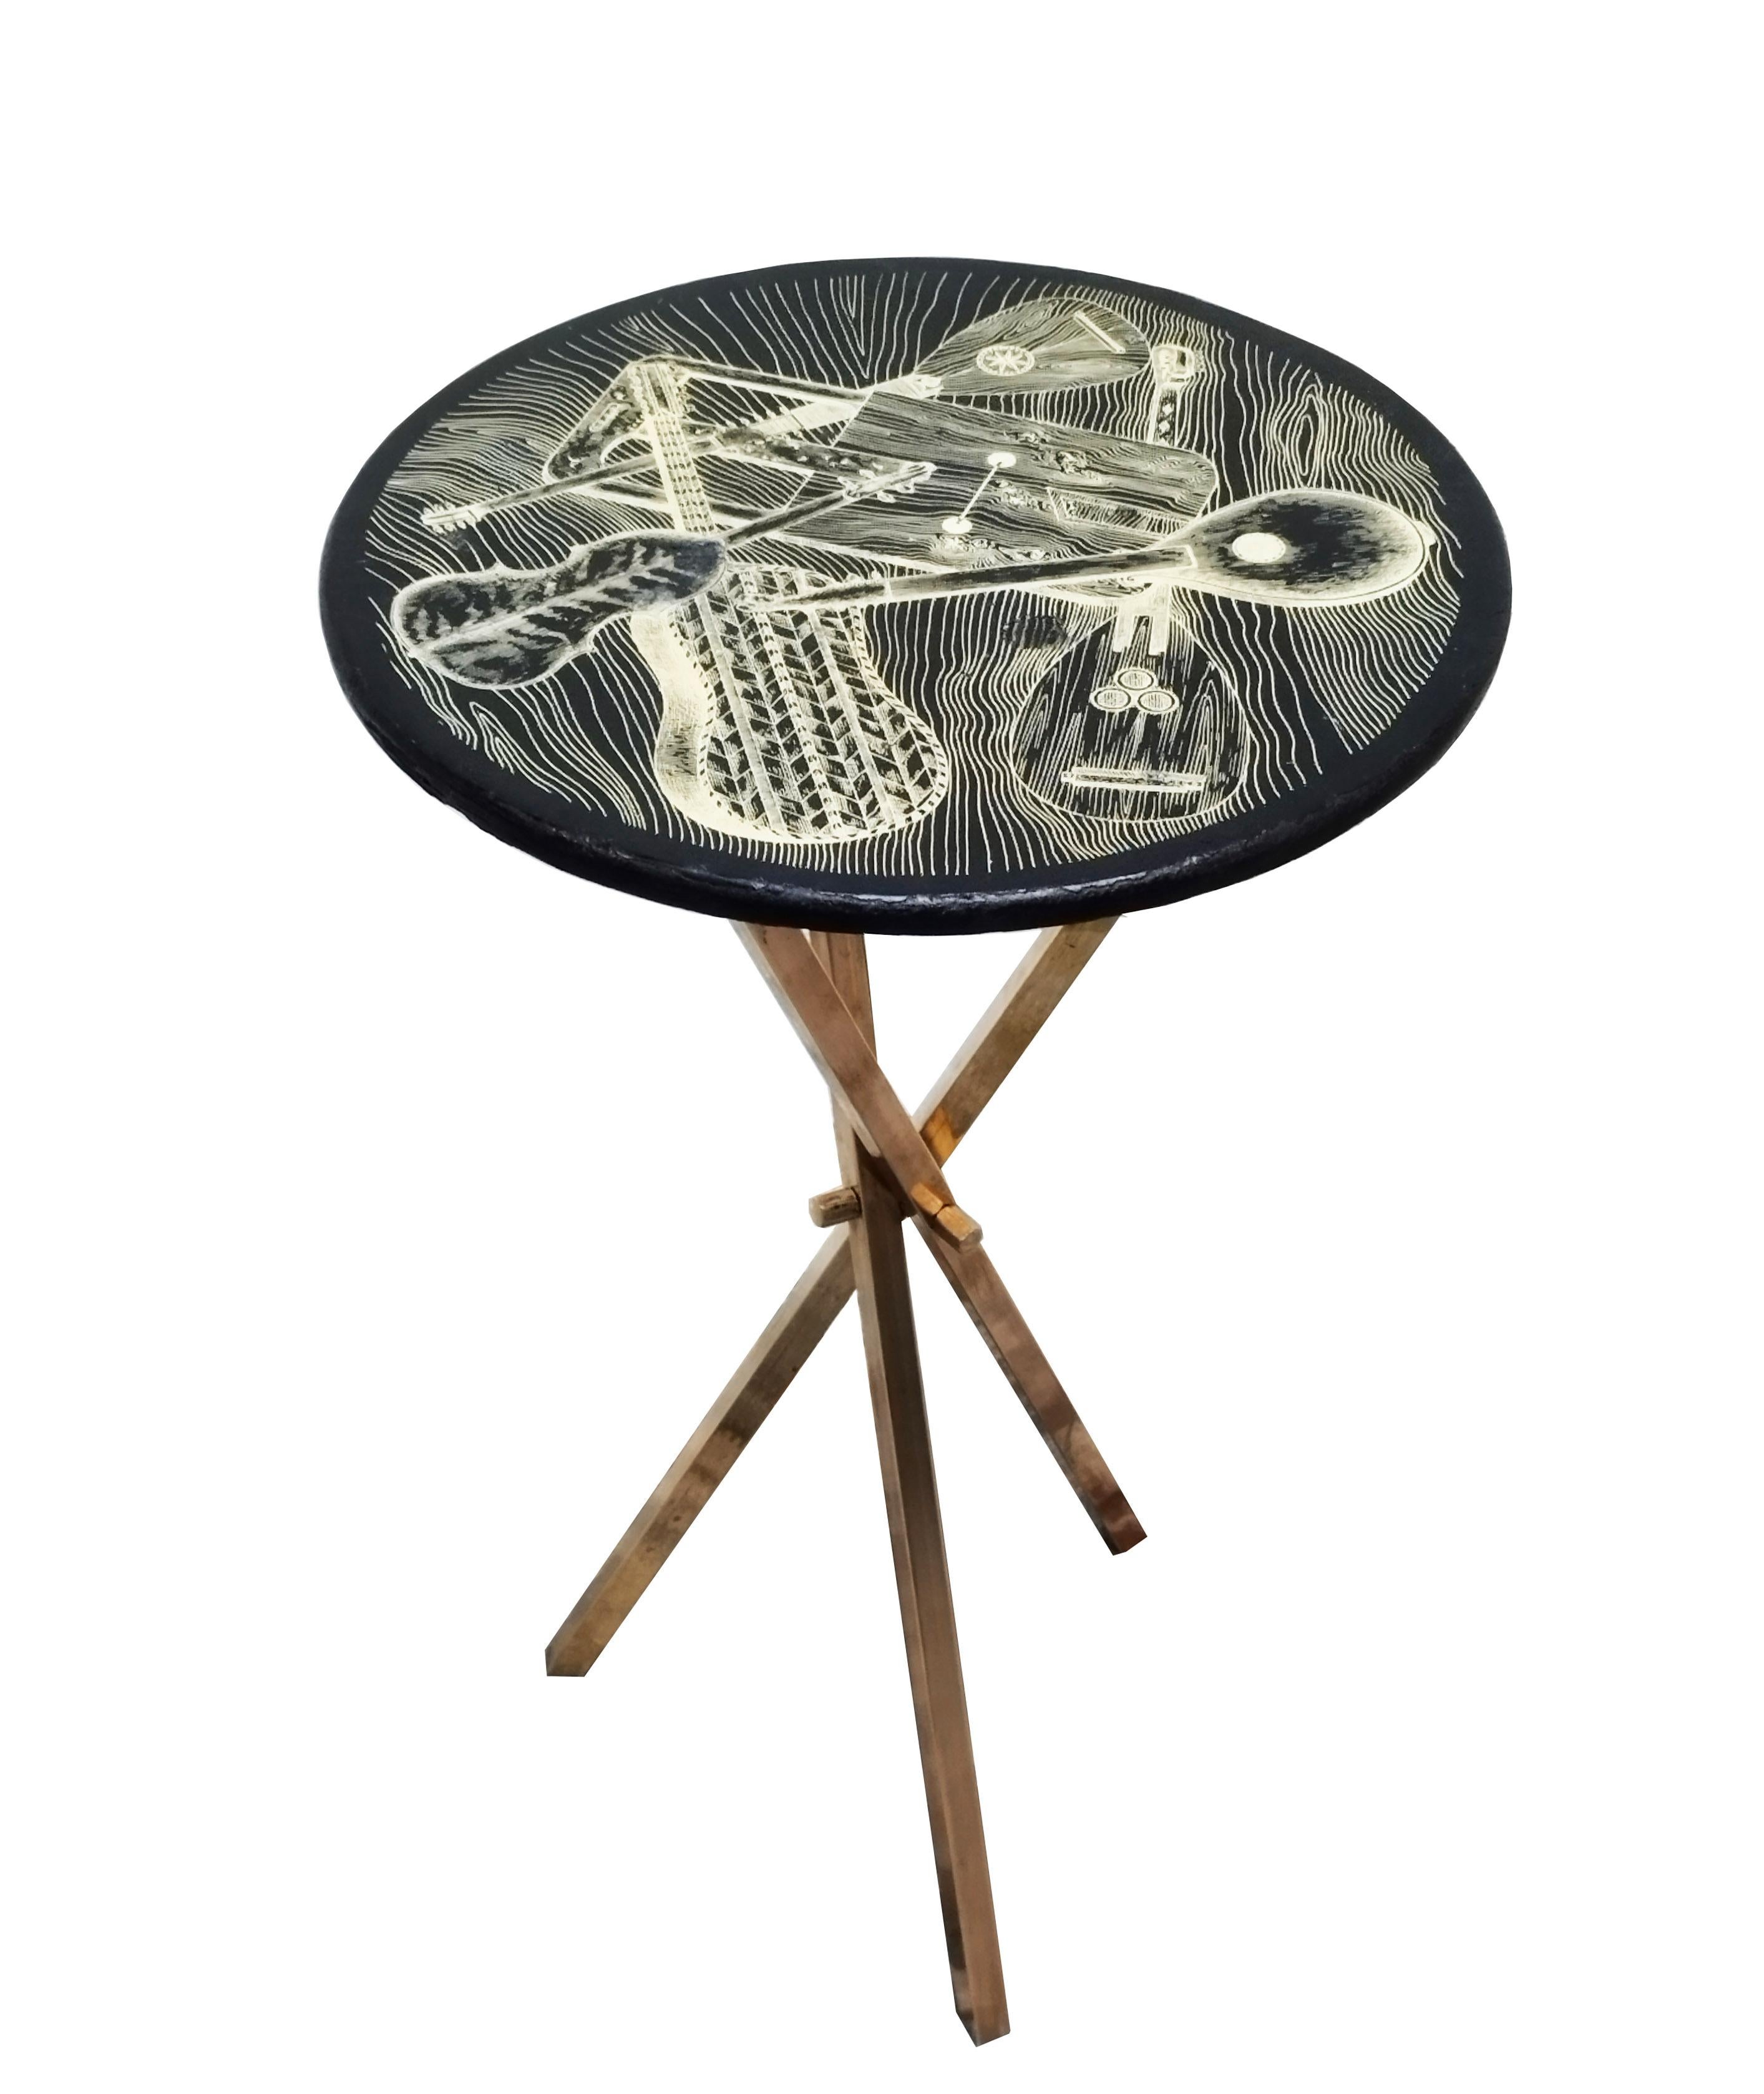 Brass tripod coffee table, under its original Fornasetti Milano Italia 1960 label. The coffee table is made of black and gold lacquered wood with a musical motif. This intriguing coffee table by Piero Fornasetti would work well as a side table on